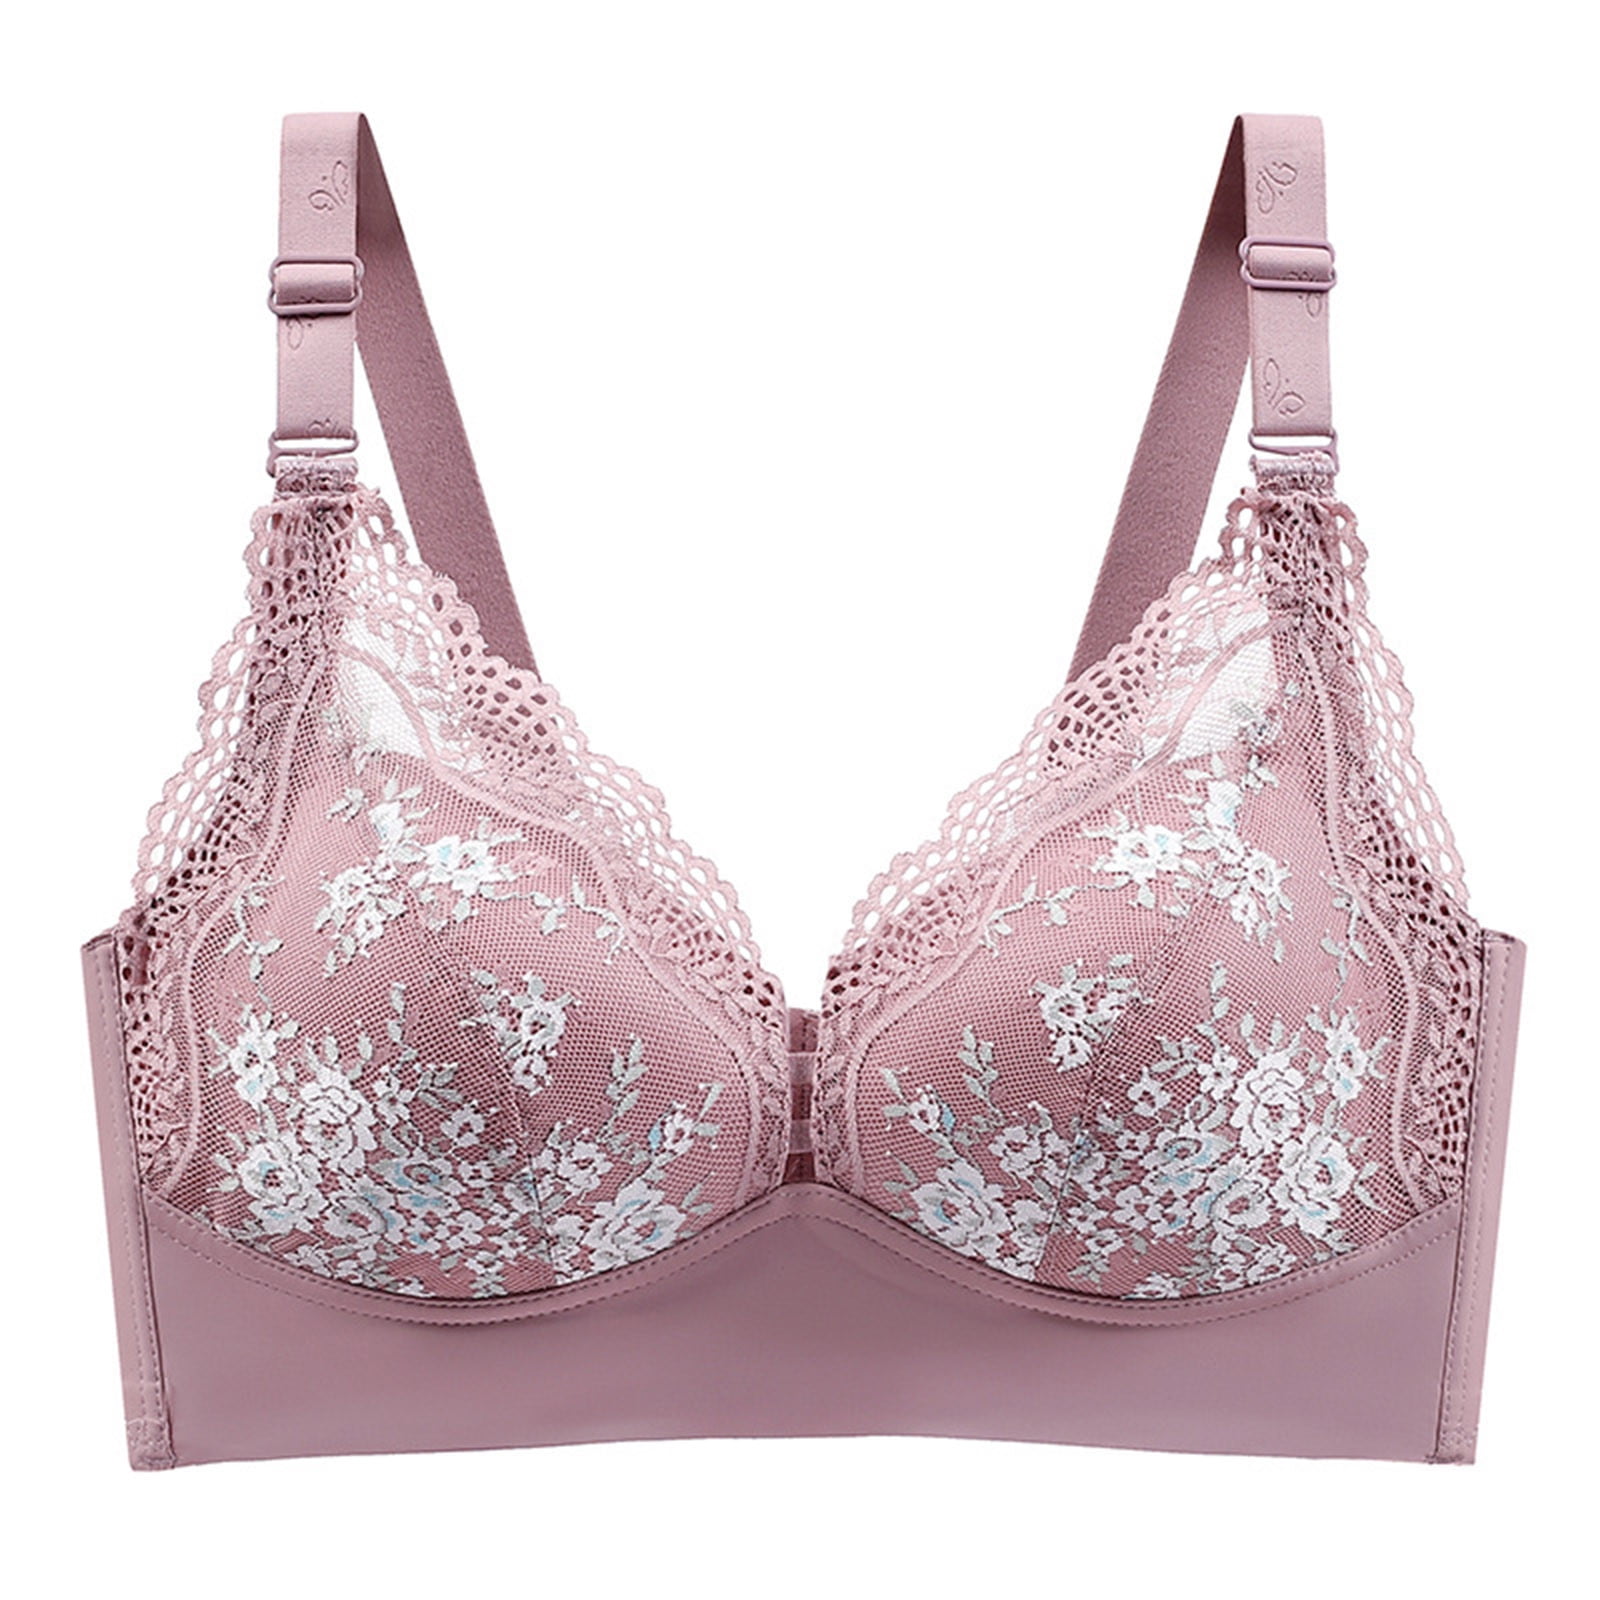 Mrat Clearance Cute Bras Clearance Womens Solid Lace Lingerie Bras